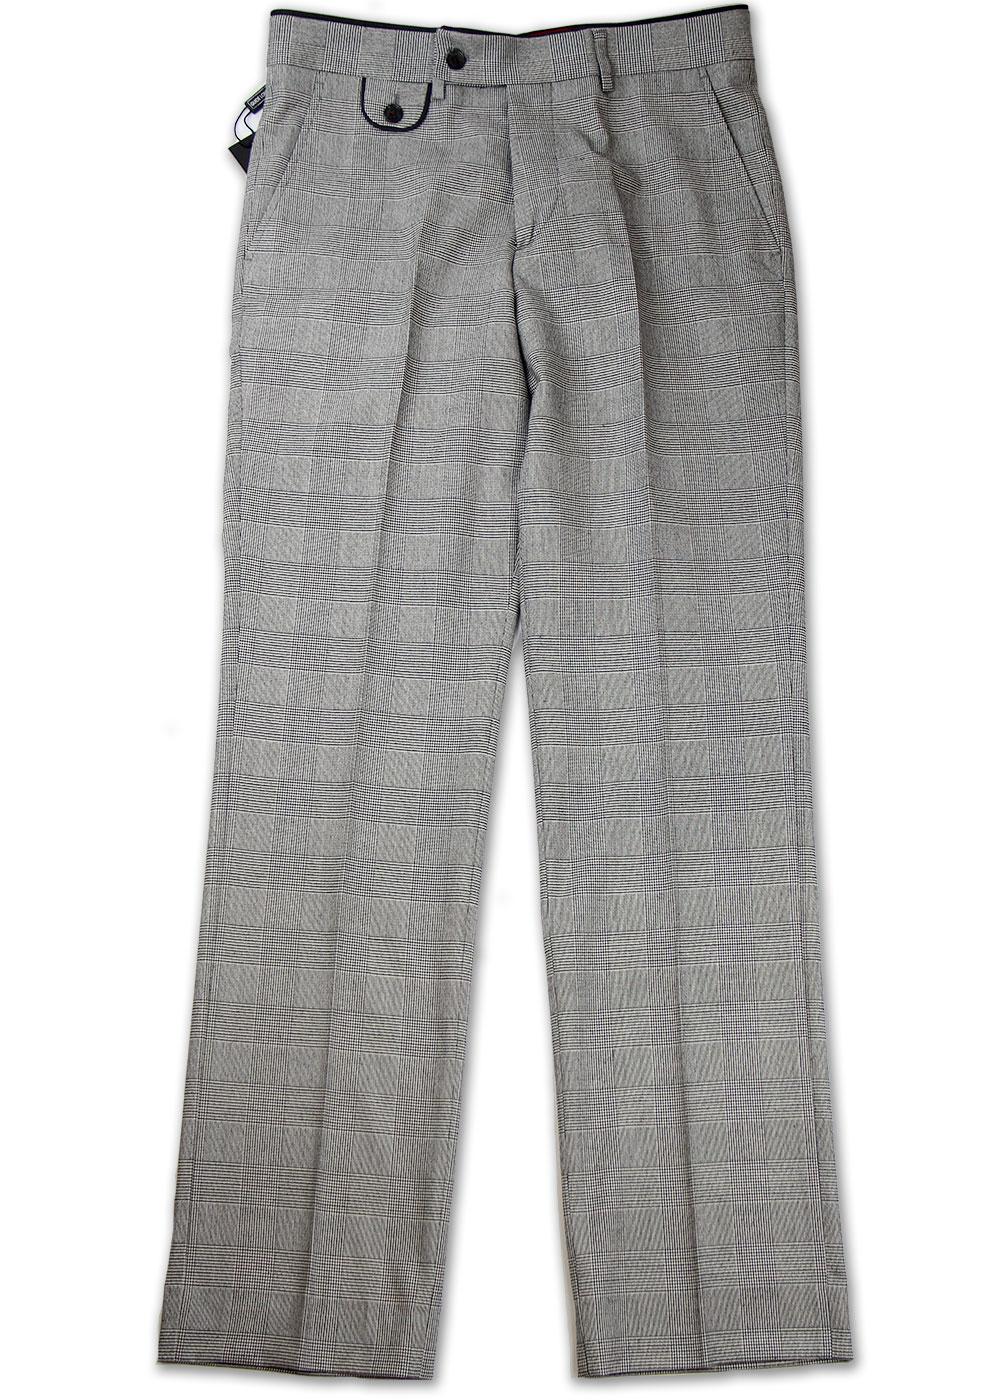 GUIDE LONDON Mod Prince Of Wales Check Trousers